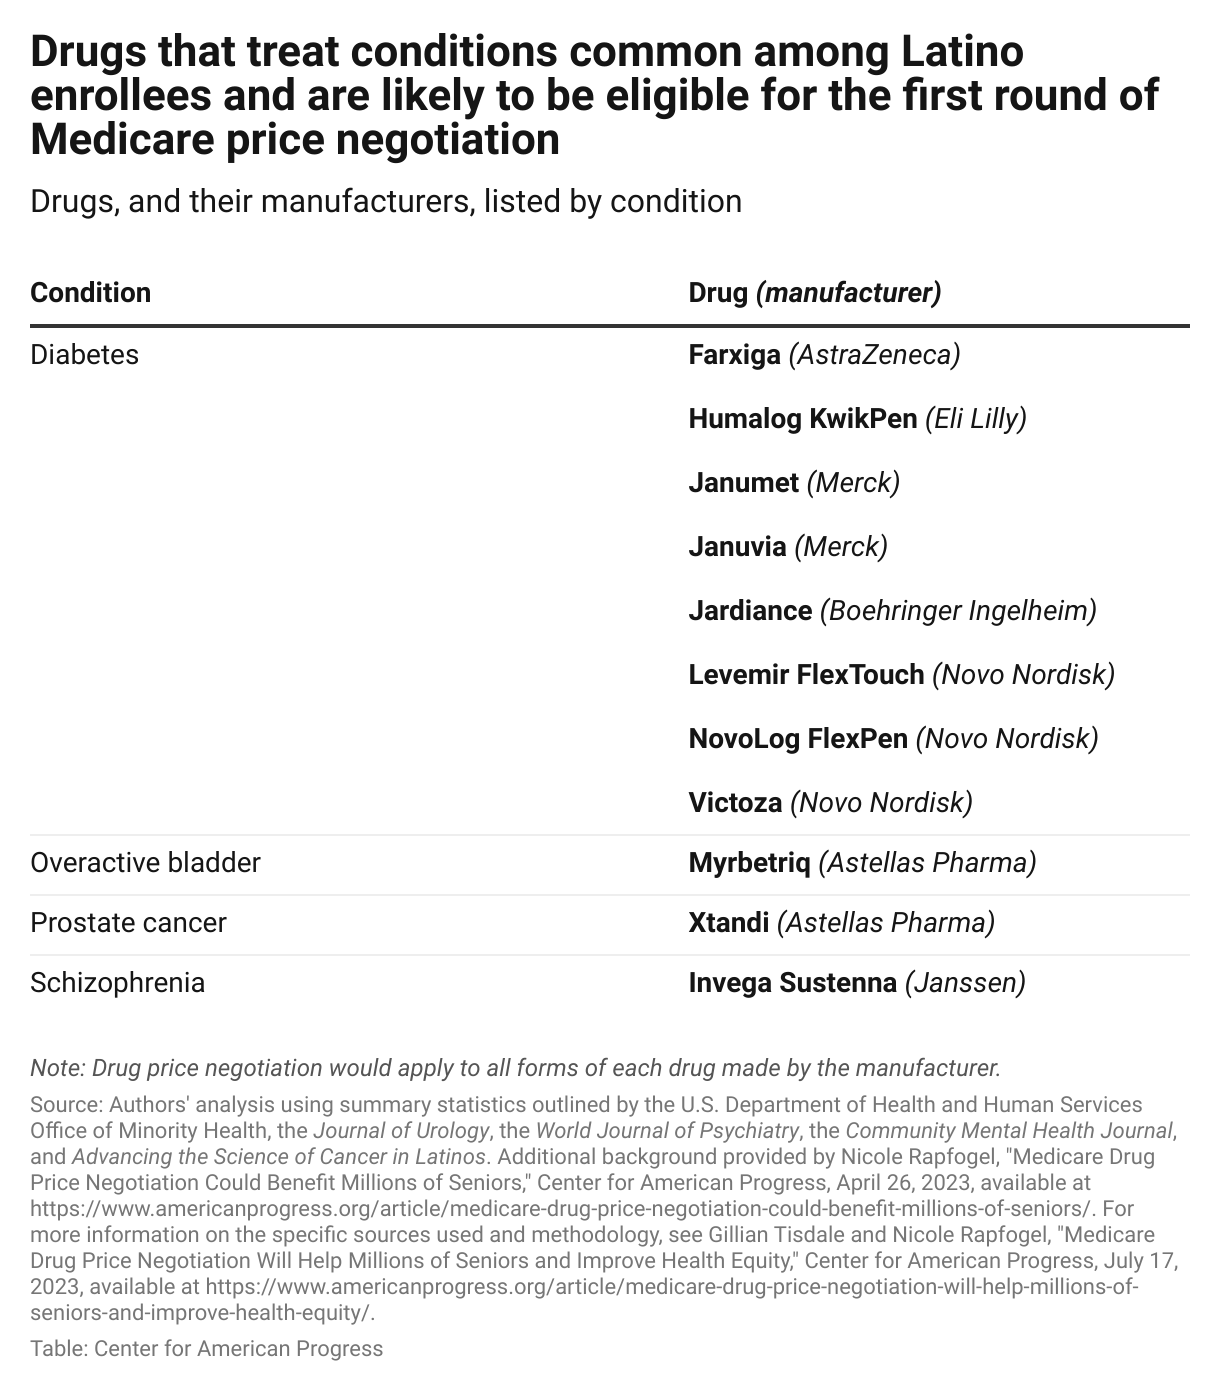 List of drugs likely to be included in Medicare drug price negotiation that treat conditions common among Latino enrollees, including diabetes, overactive bladder, prostate cancer, and schizophrenia.